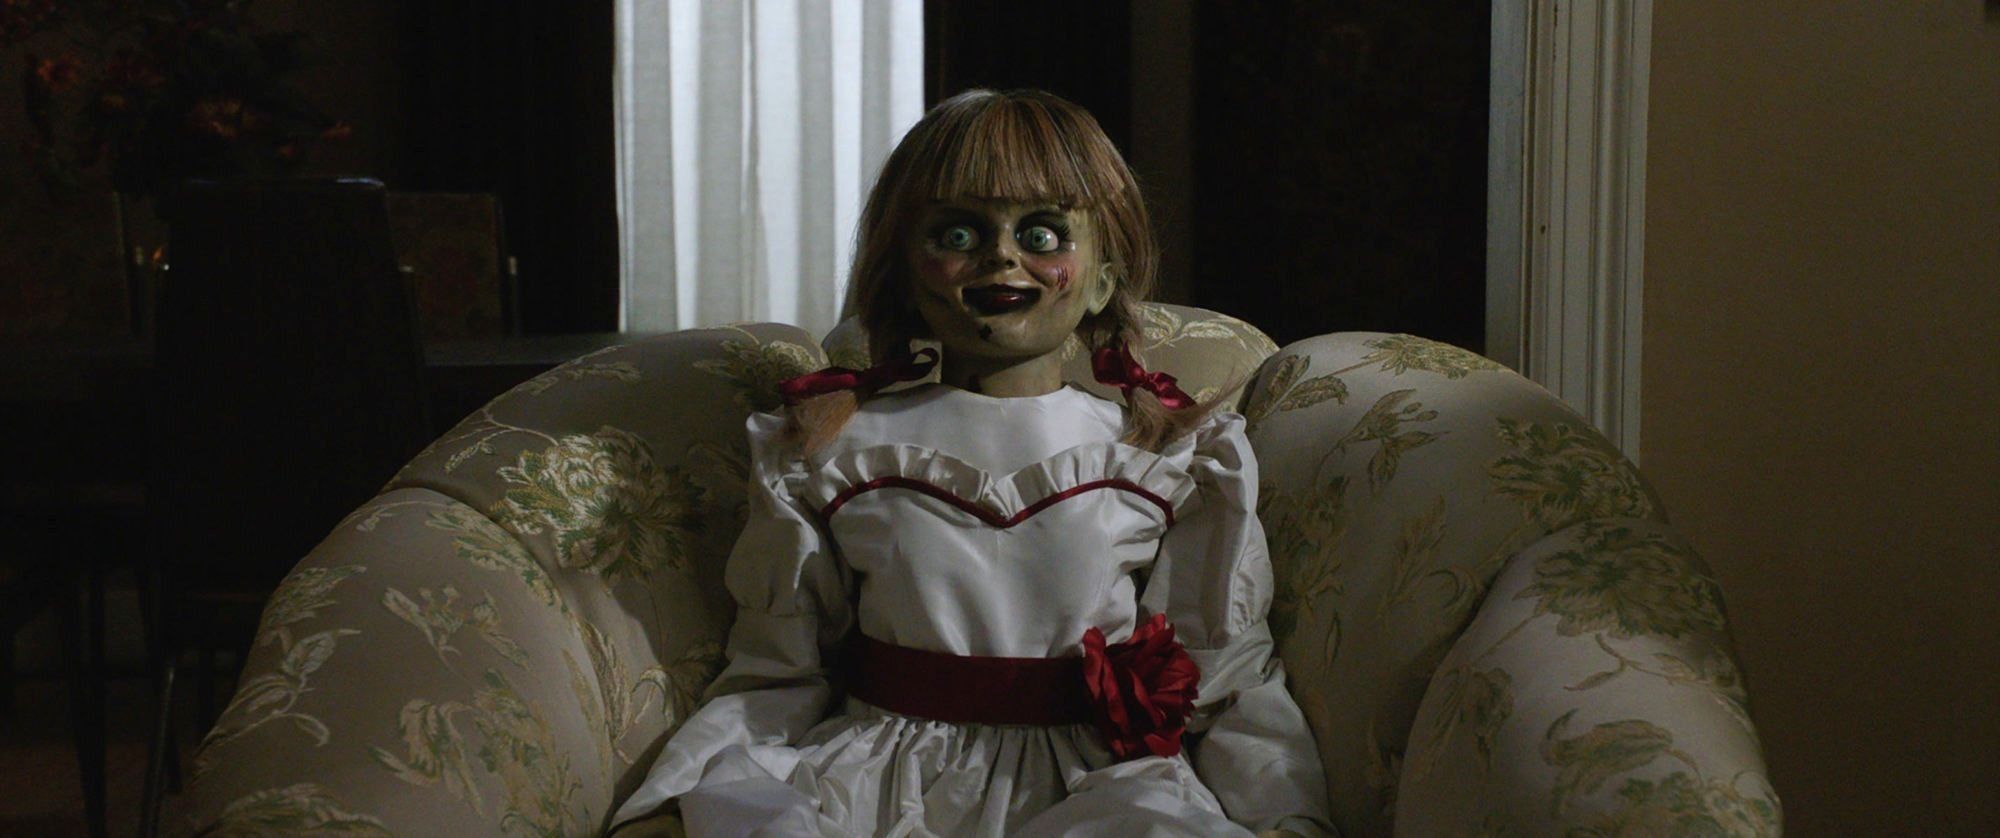 Annabelle's real-life doll didn't escape its museum afterall